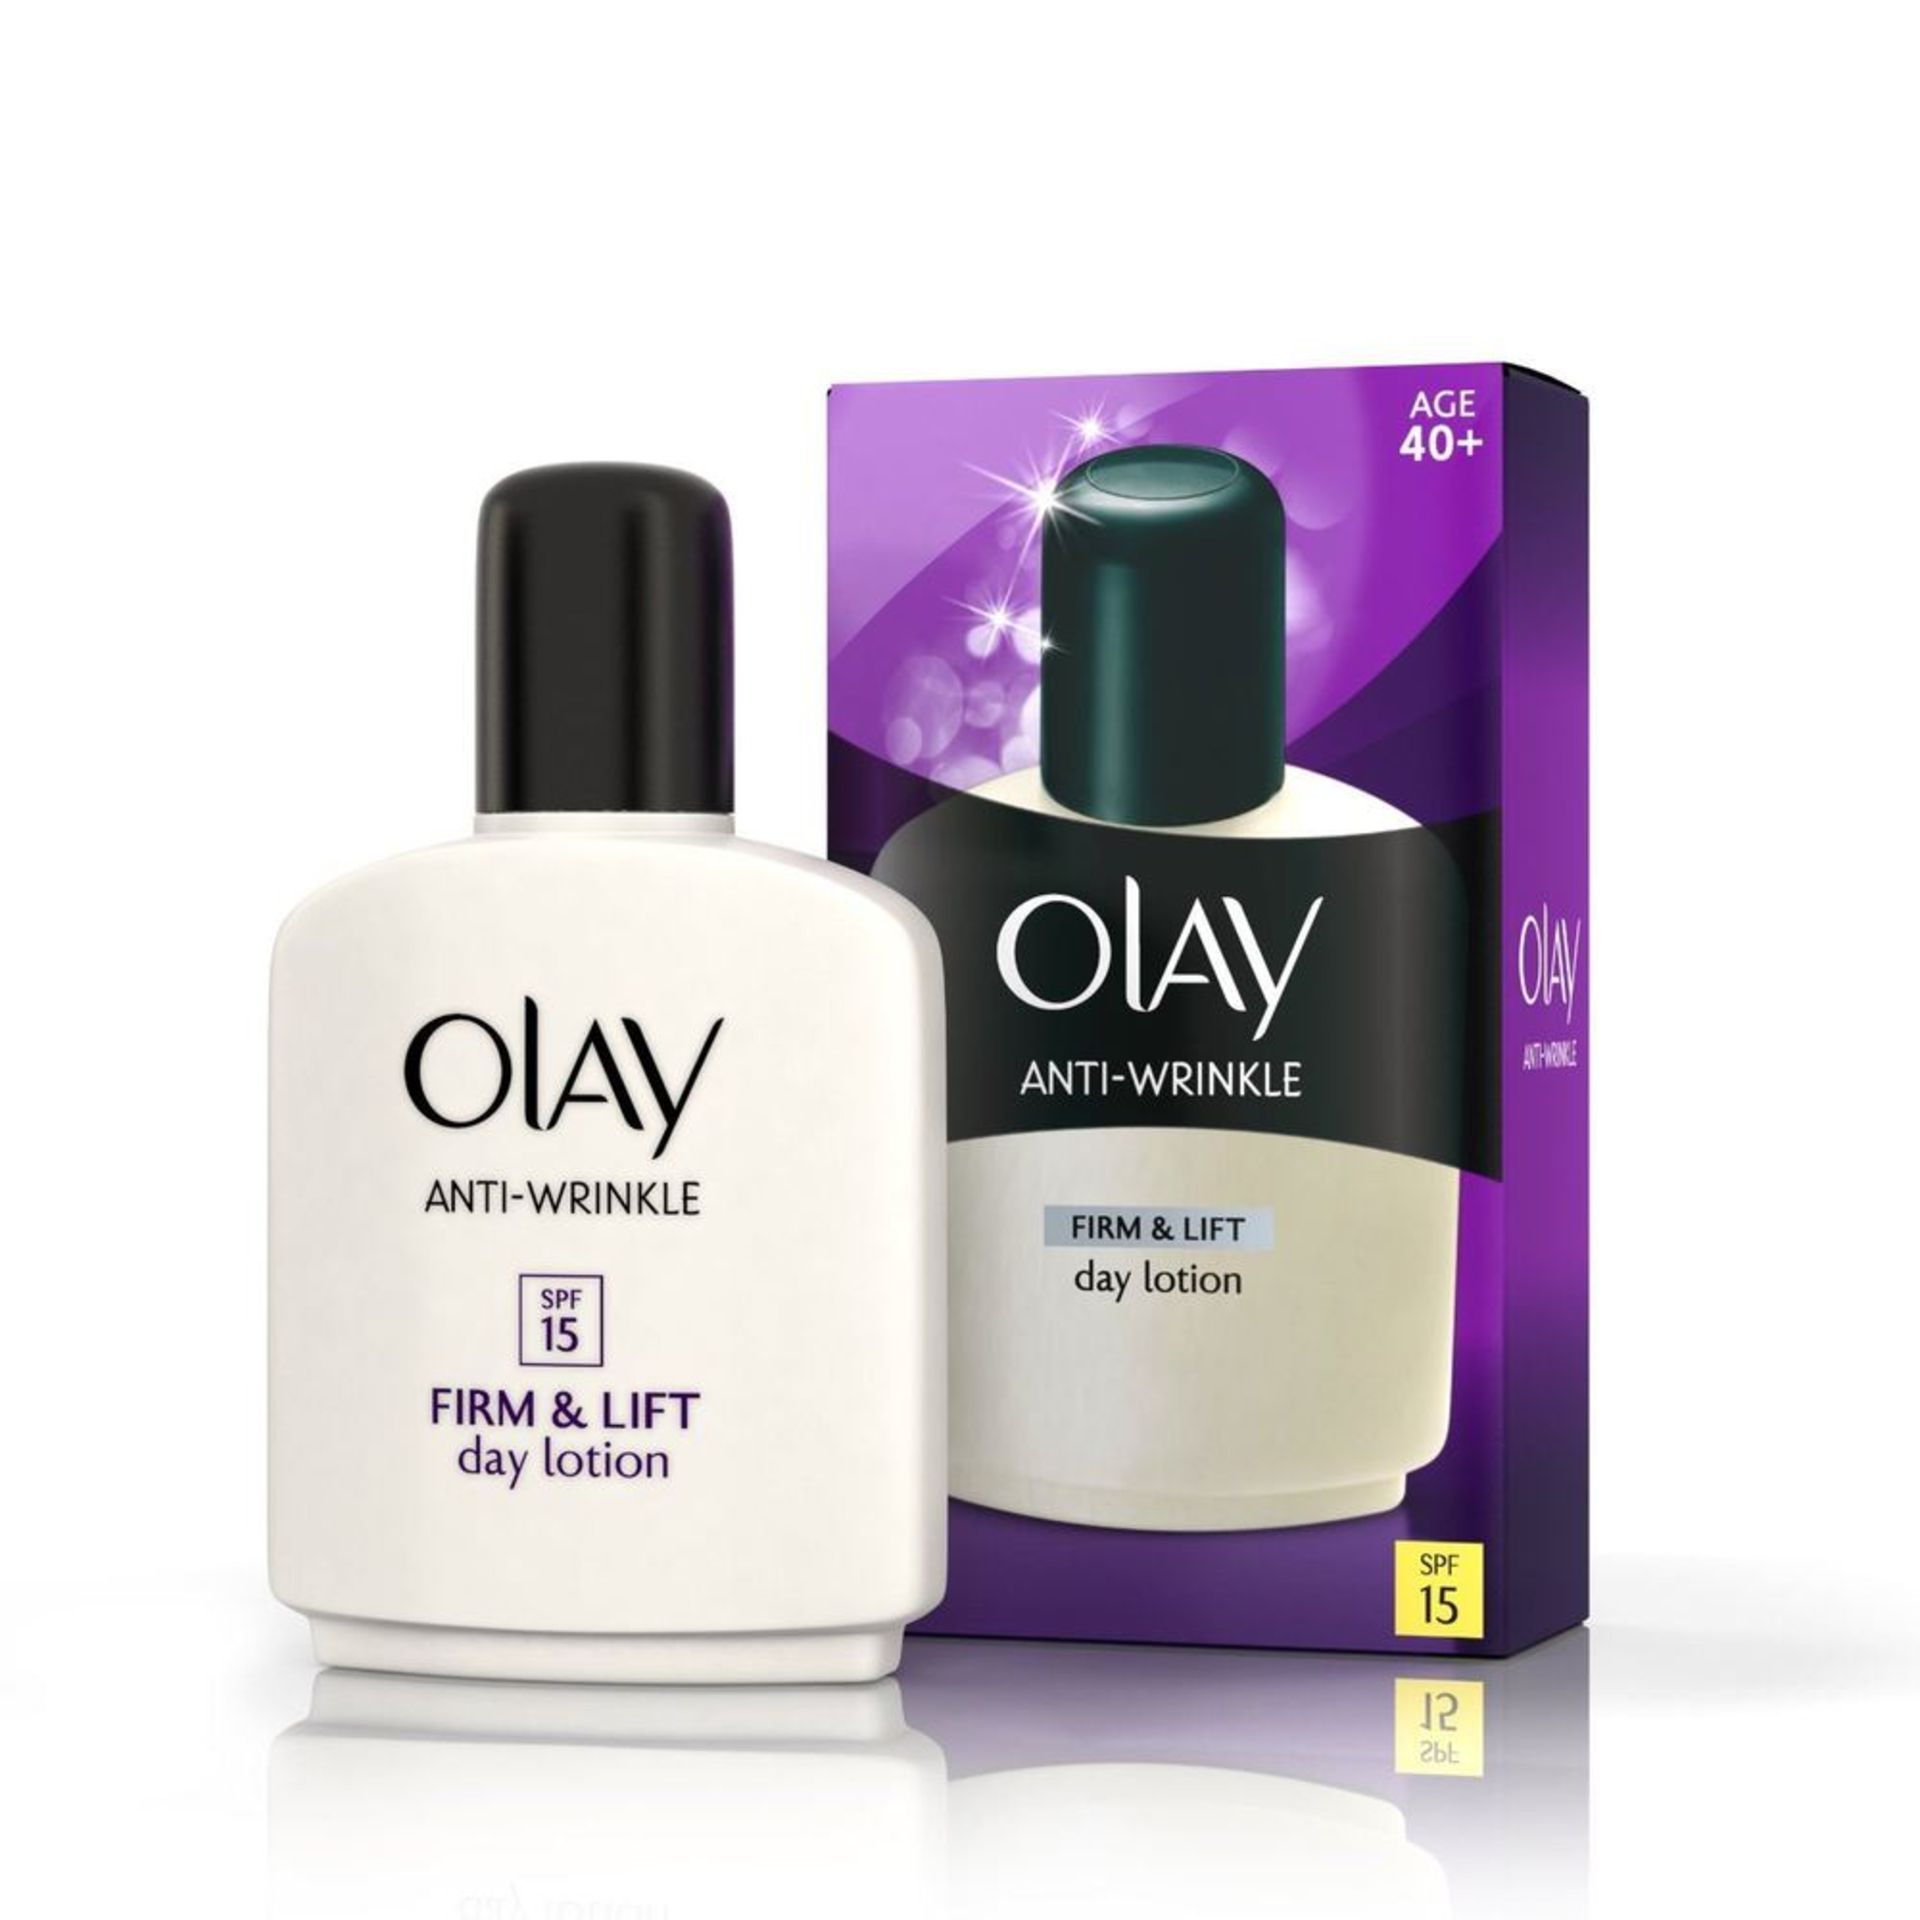 V Brand New Olay Anti-Wrinkle Firm & Lift Day Lotion 100 ml/SPF15/40+ X 2 YOUR BID PRICE TO BE